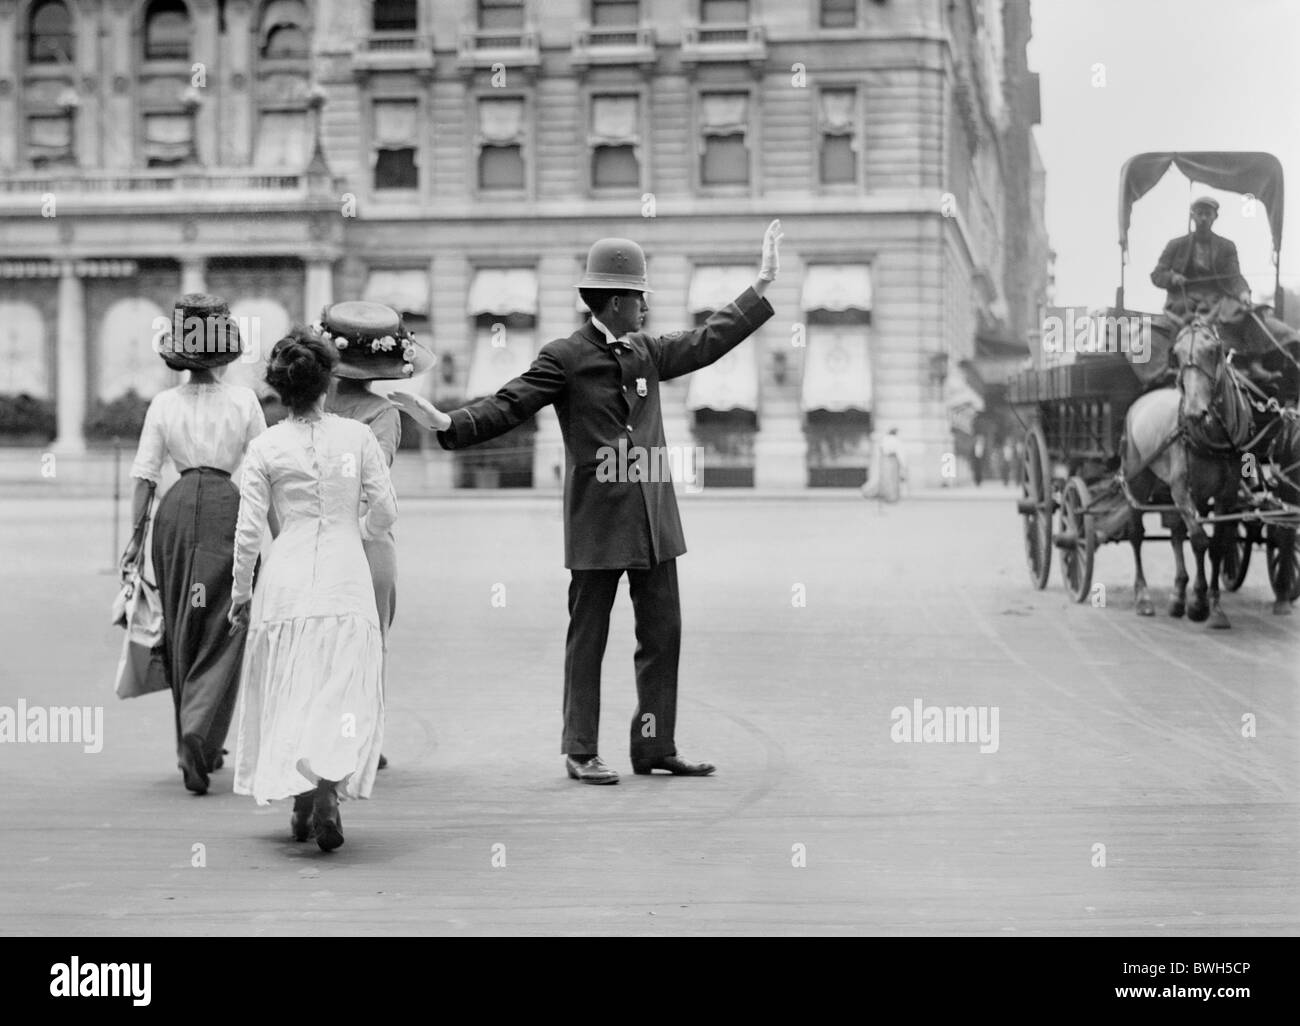 Vintage photo c1911 of a traffic cop in New York City halting a horse-drawn wagon to allow three women to cross the road safely. Stock Photo